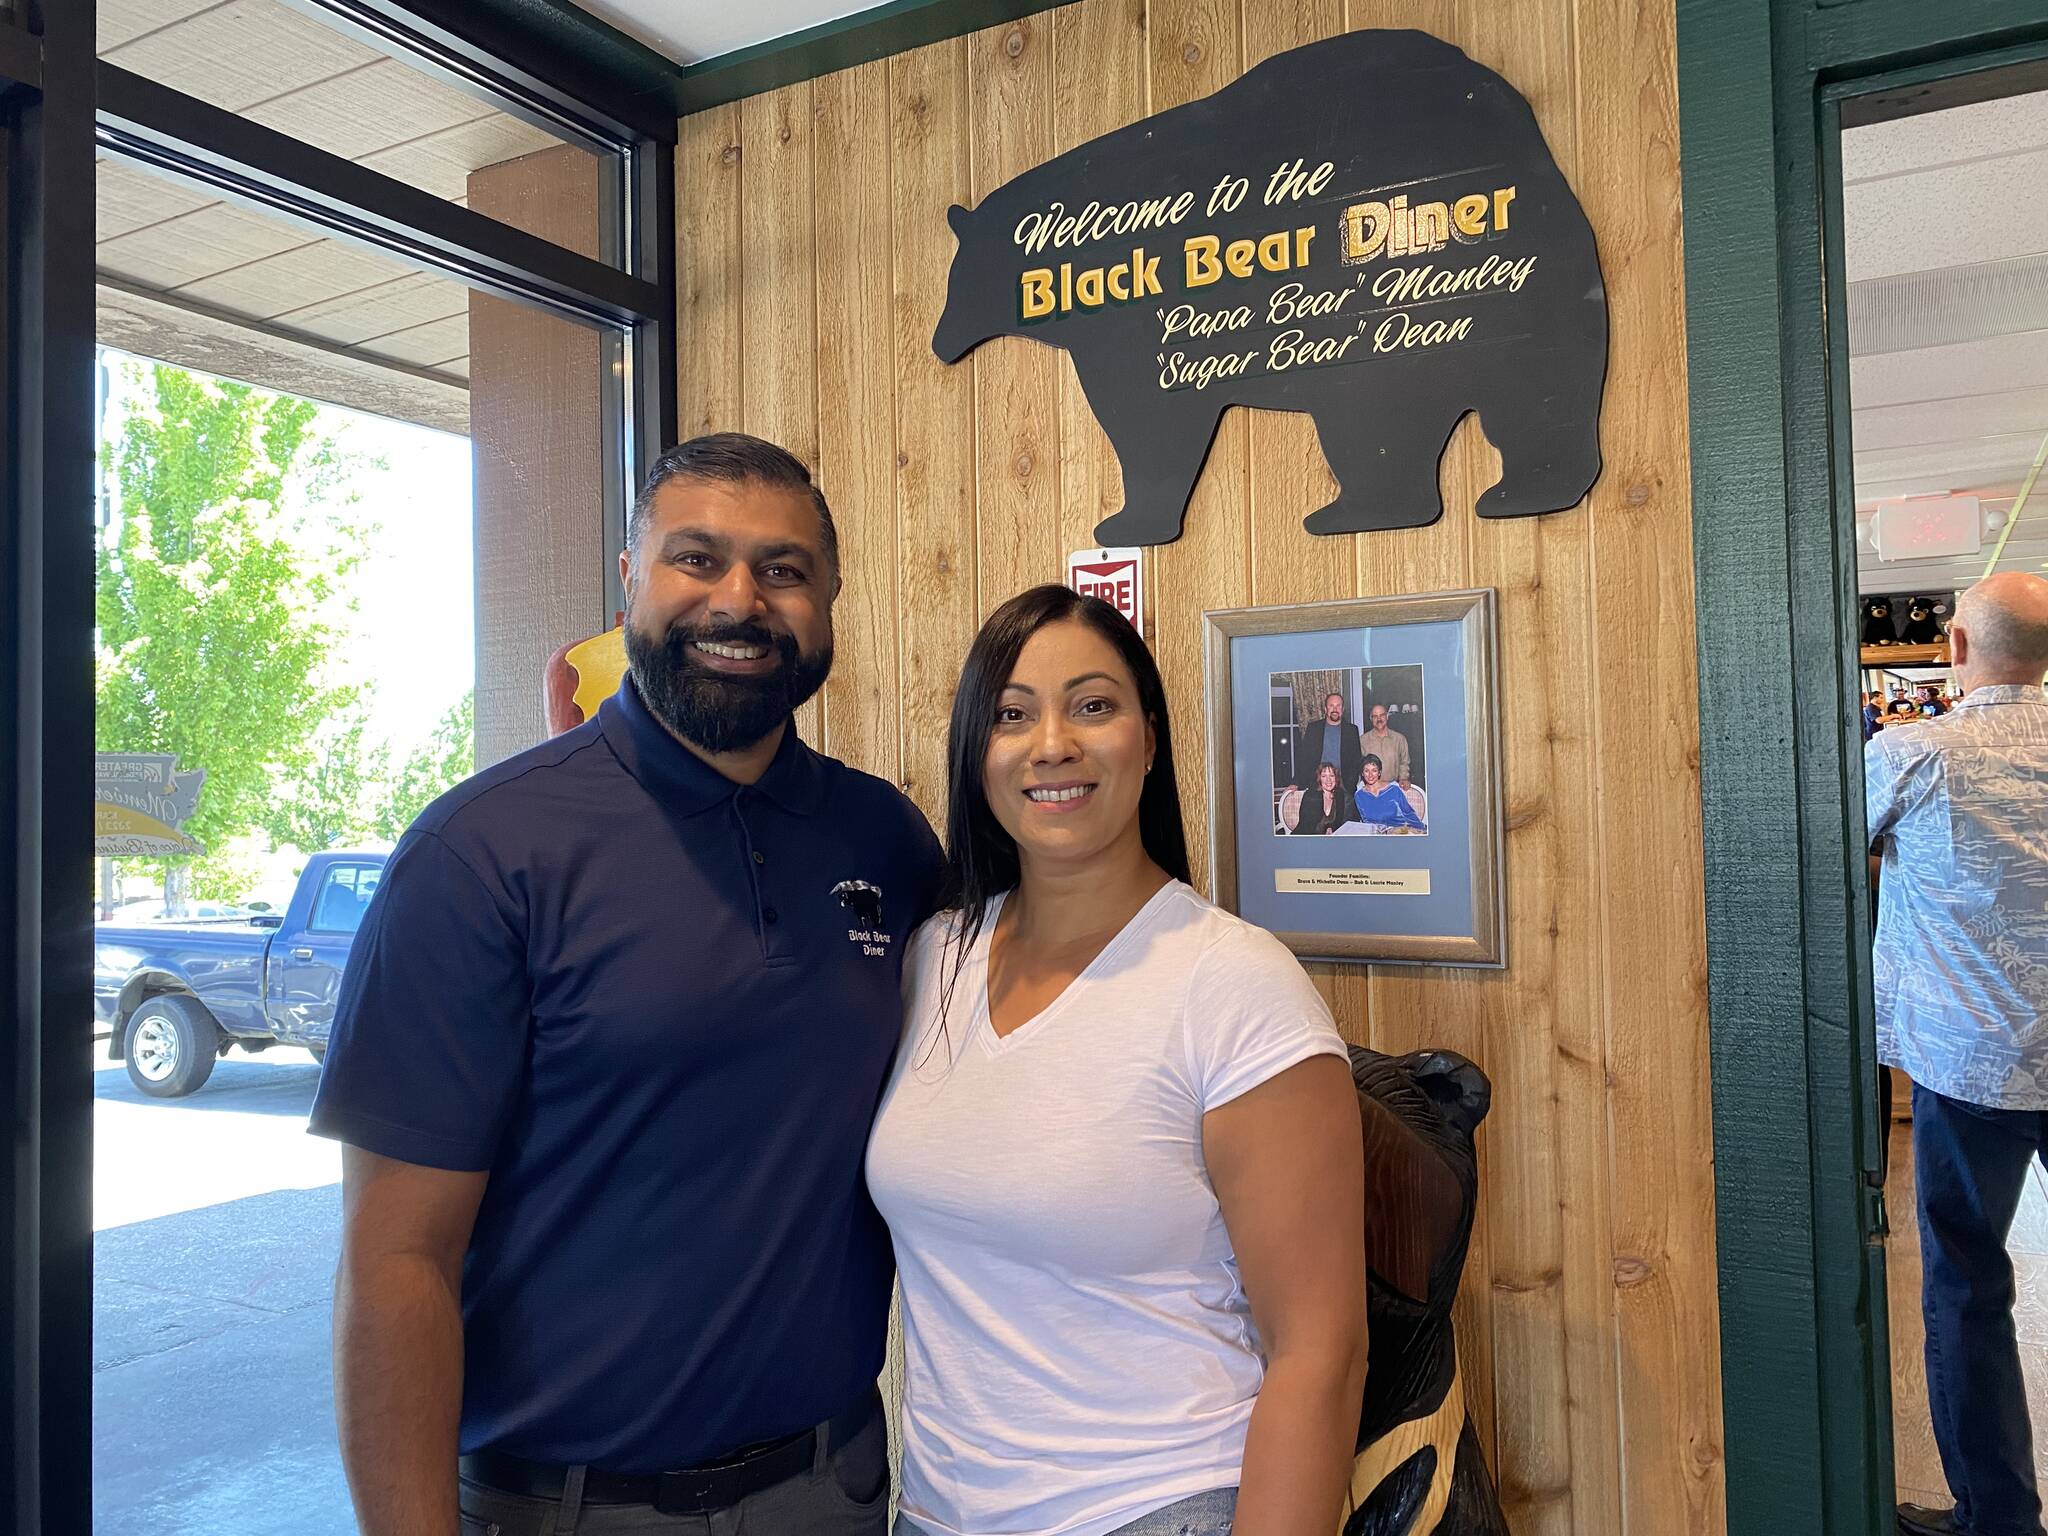 Owners Danny and Darshana Banwait pictured at the Black Bear Diner soft opening on June 3. Olivia Sullivan / the Mirror